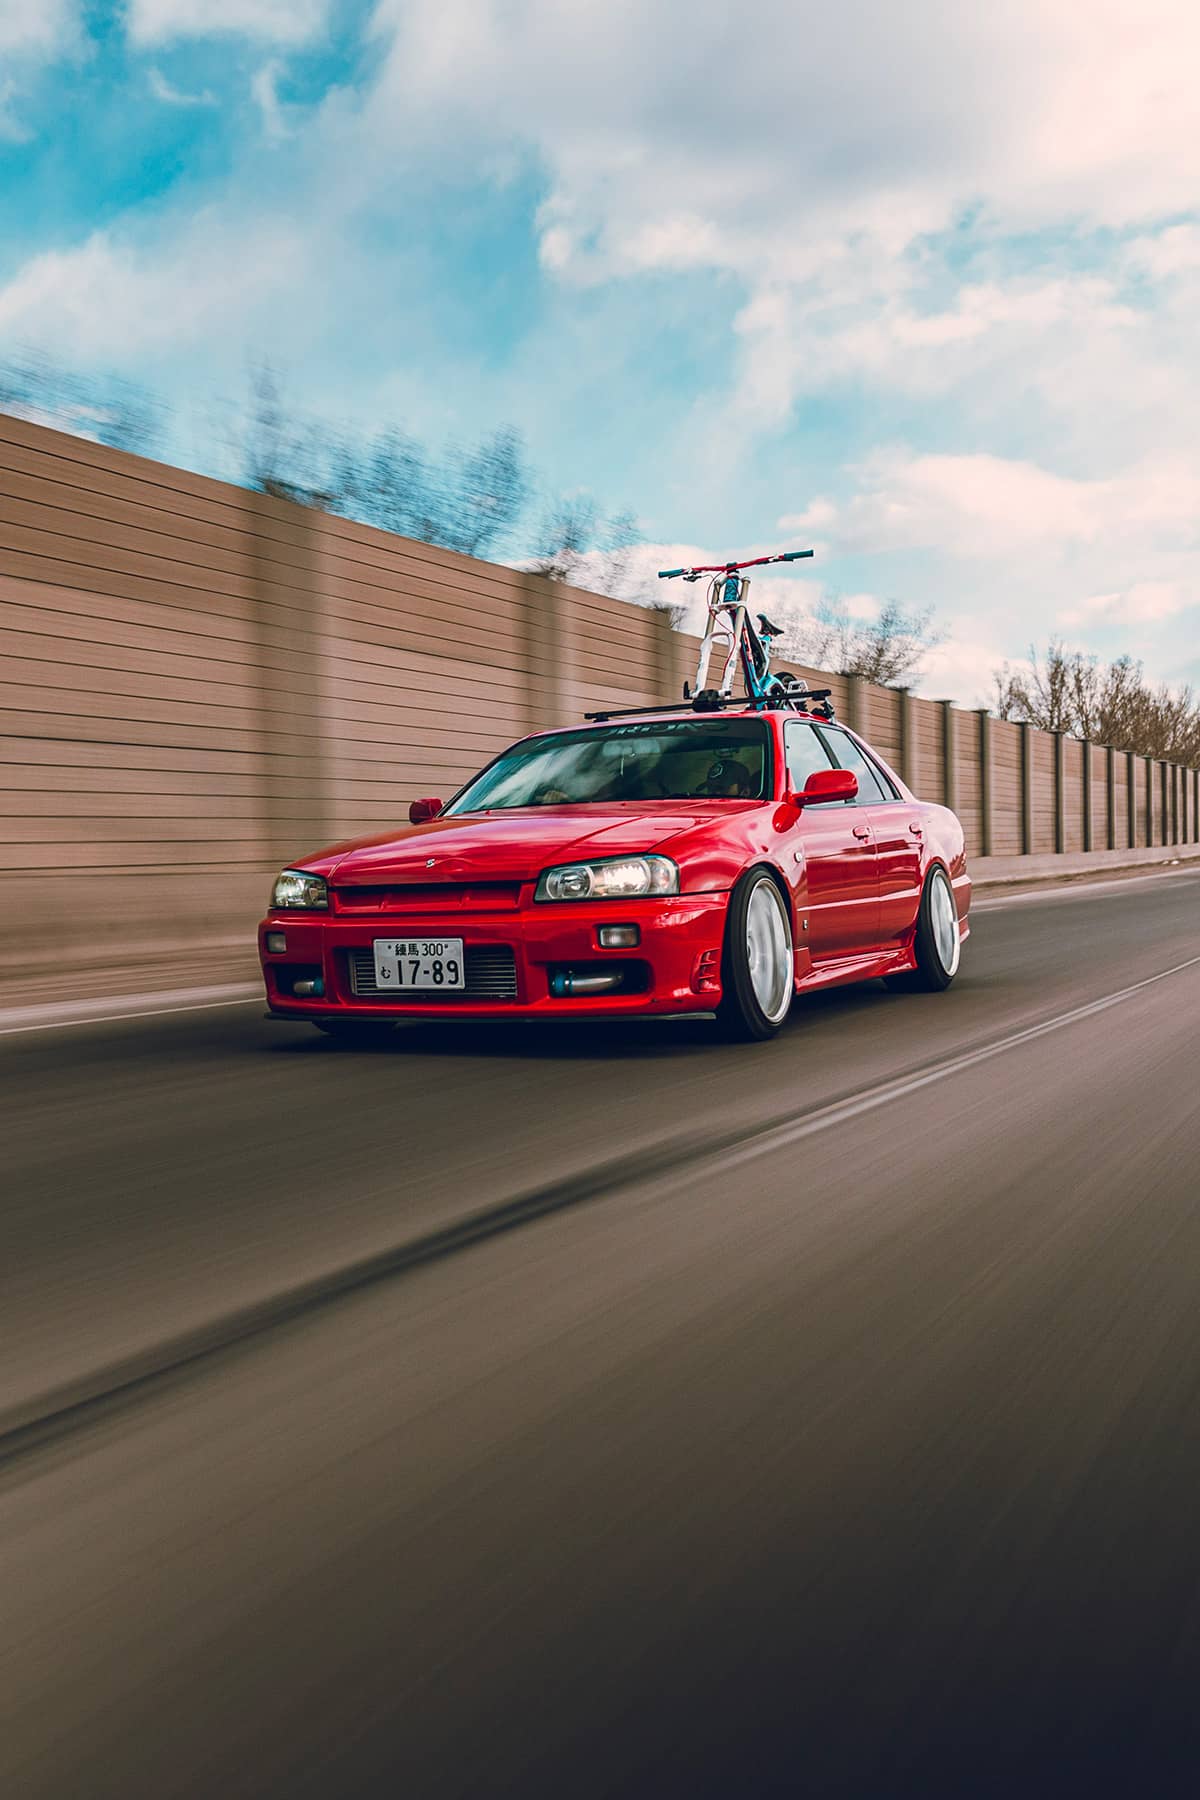 Nissan Skyline R34 sedan in red color with stance and custom wheels rolling shot